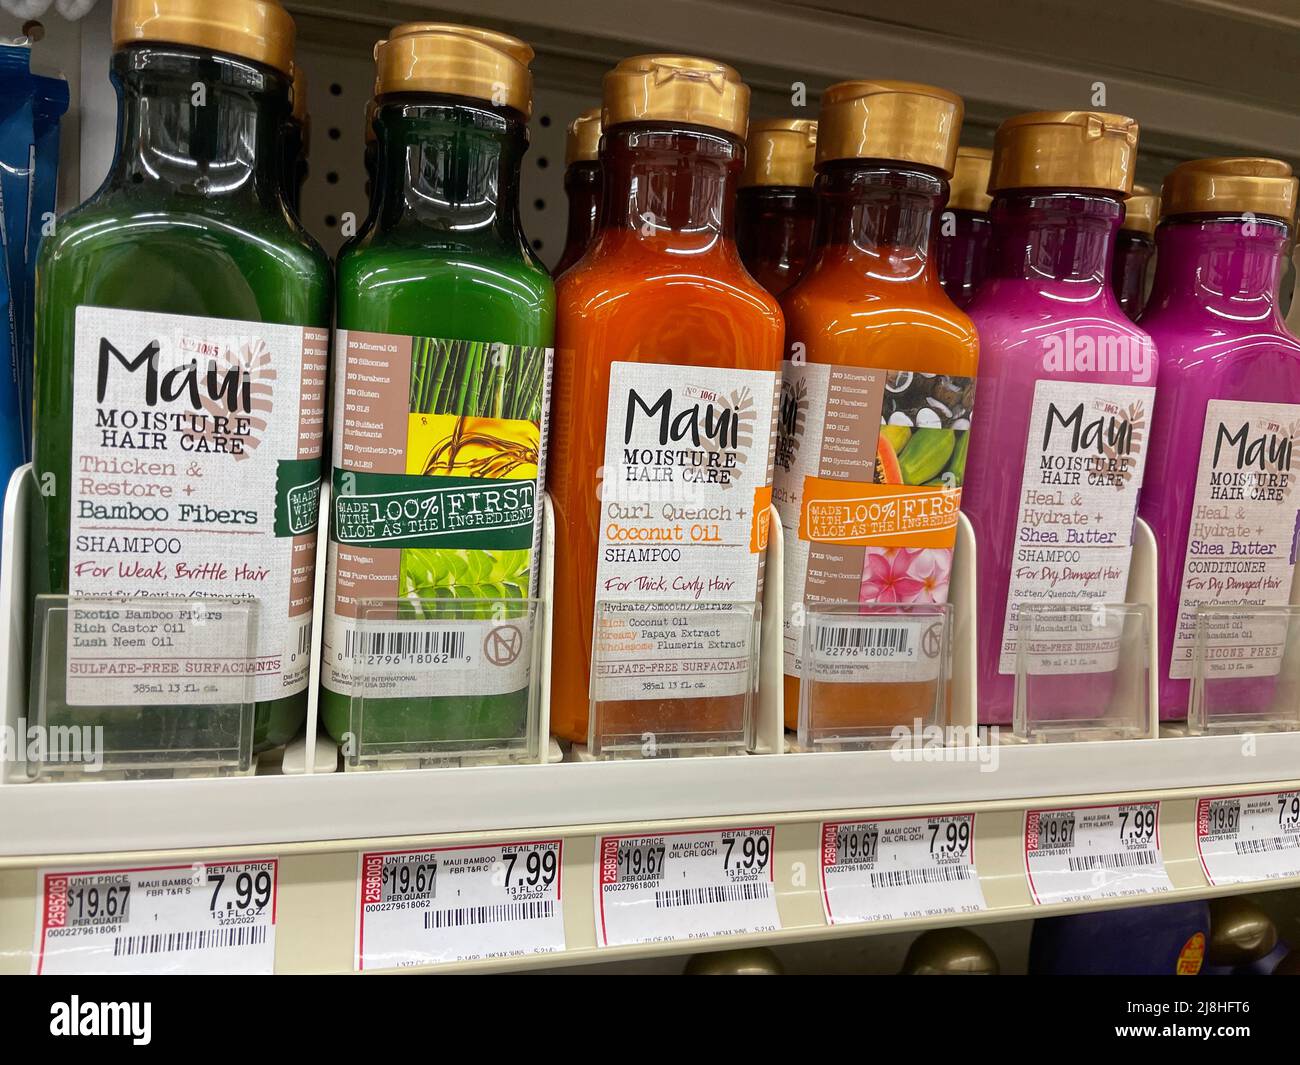 Grovetown, Ga USA - 04 15 22: Hair care products on Retail store shelves and price tags Stock Photo